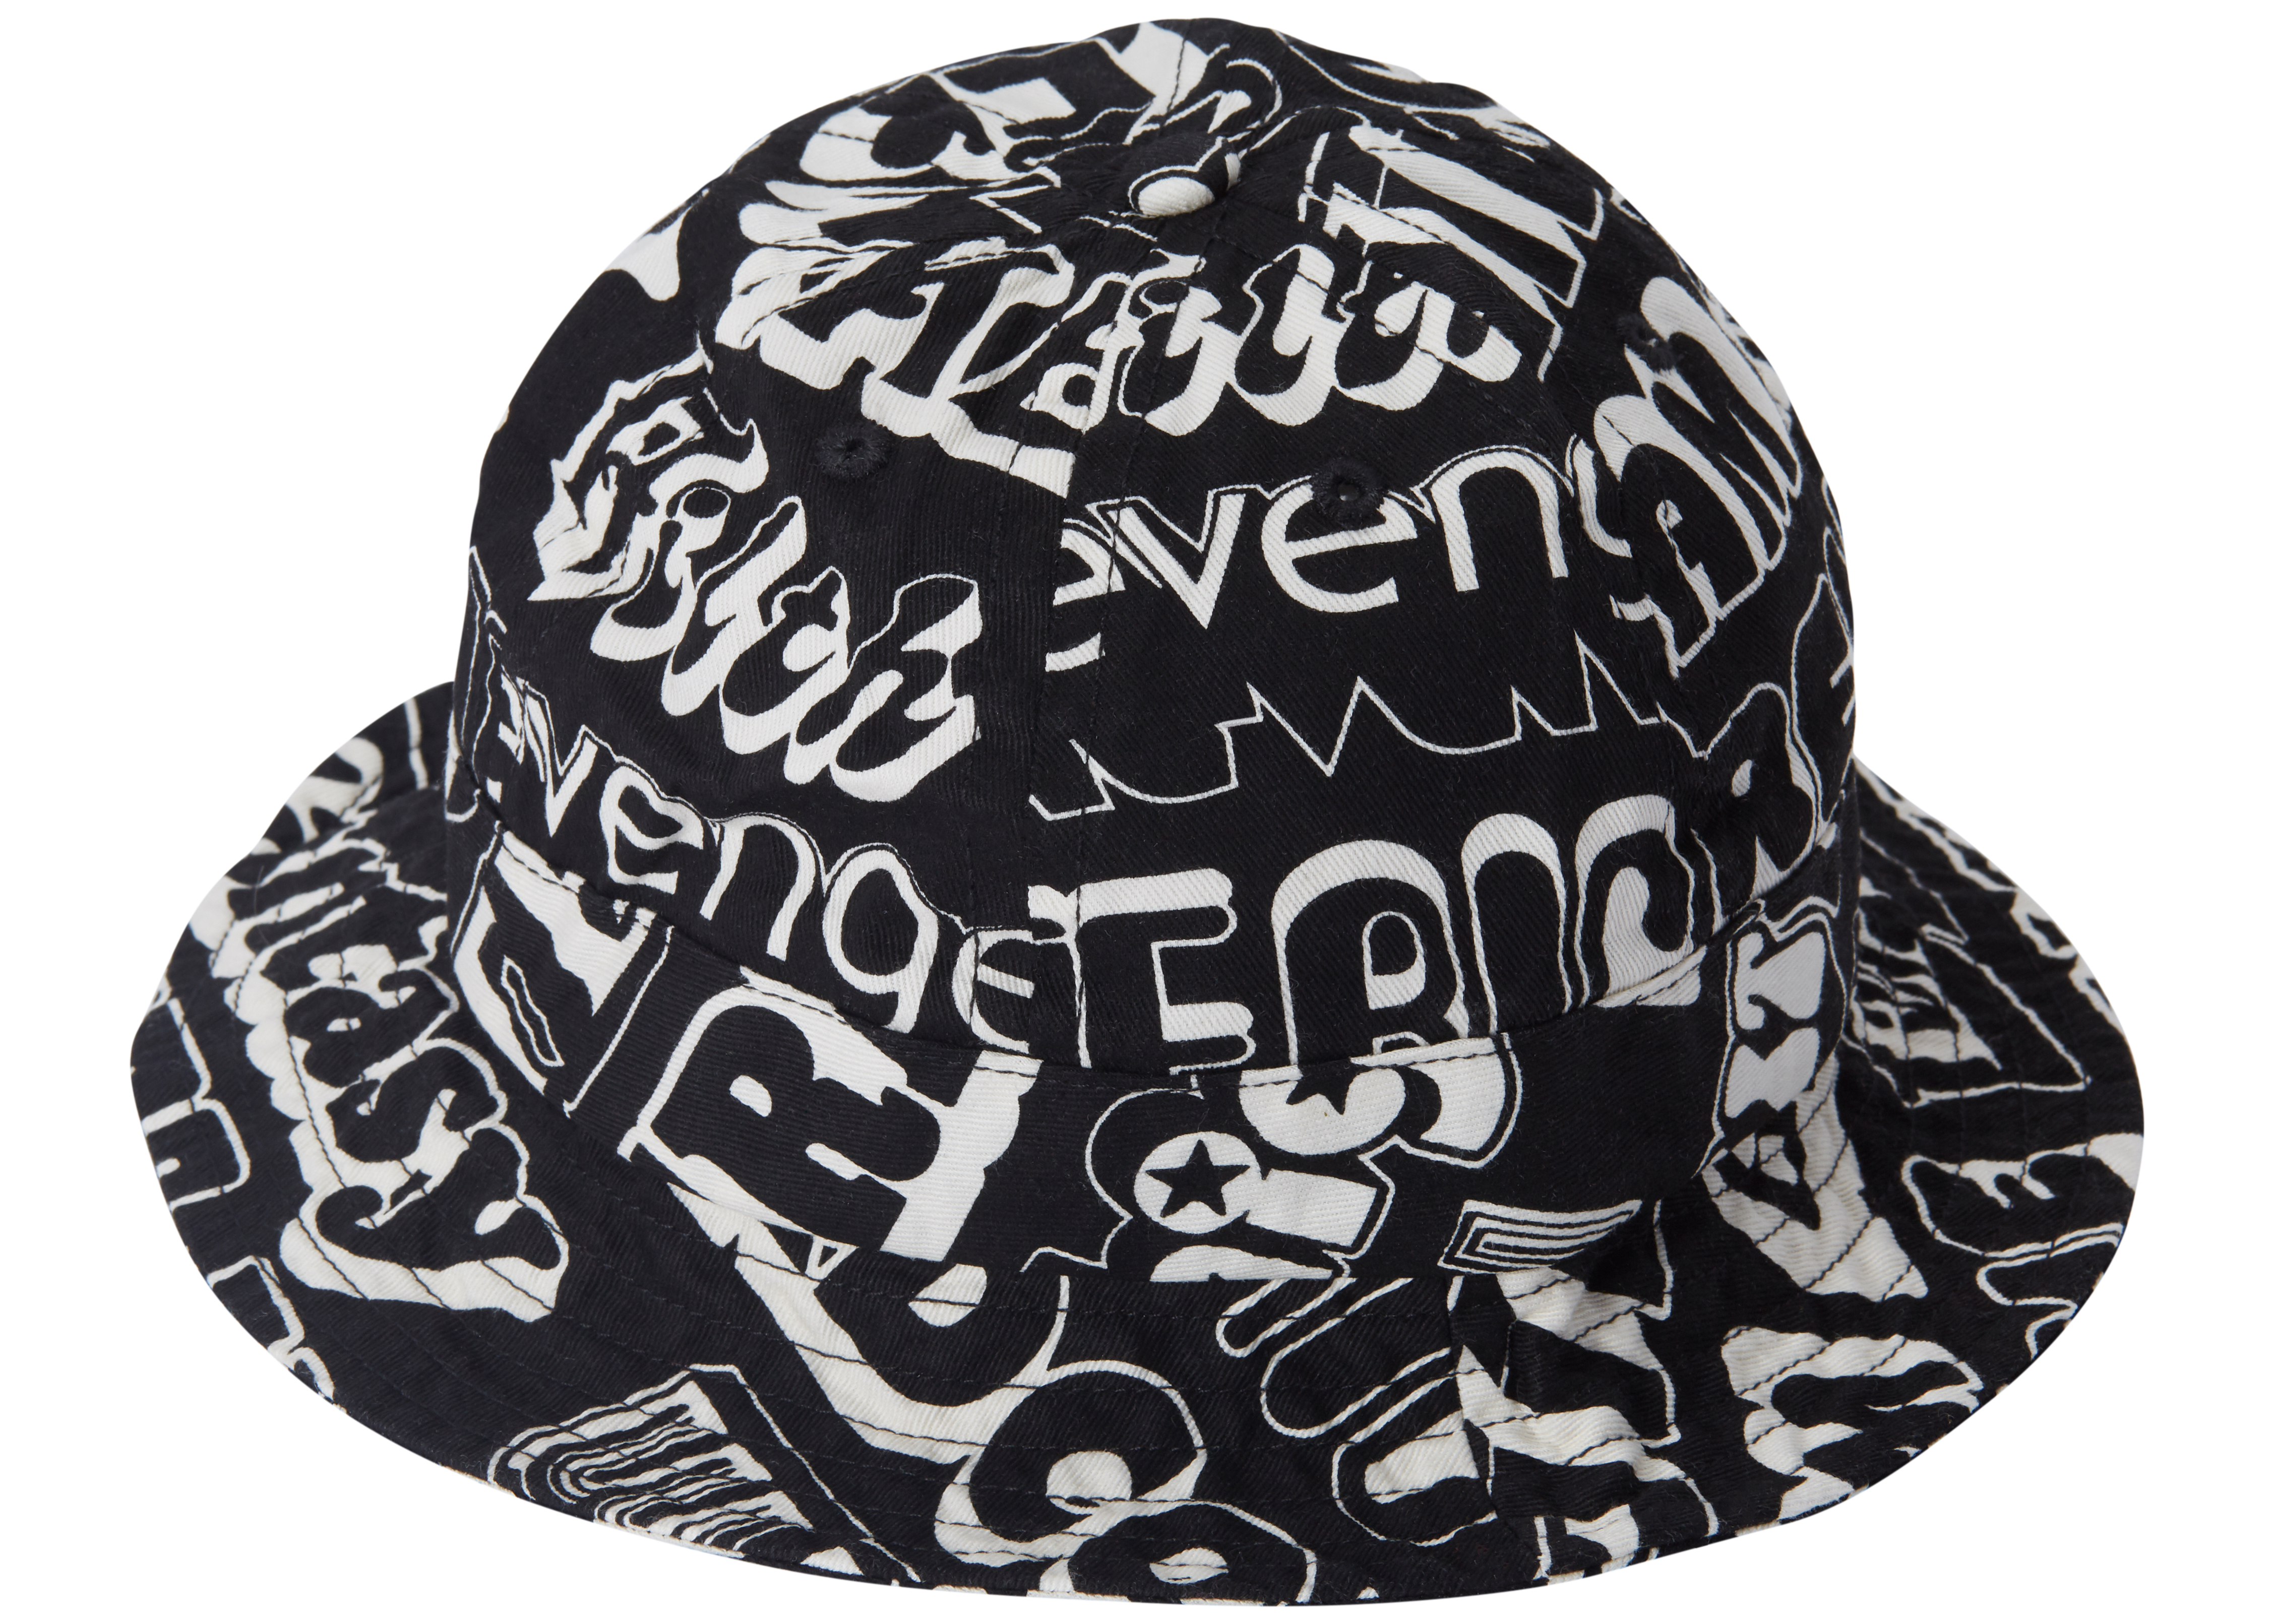 Supreme Hysteric Glamour Text Bell Hat Black - FW17 - US